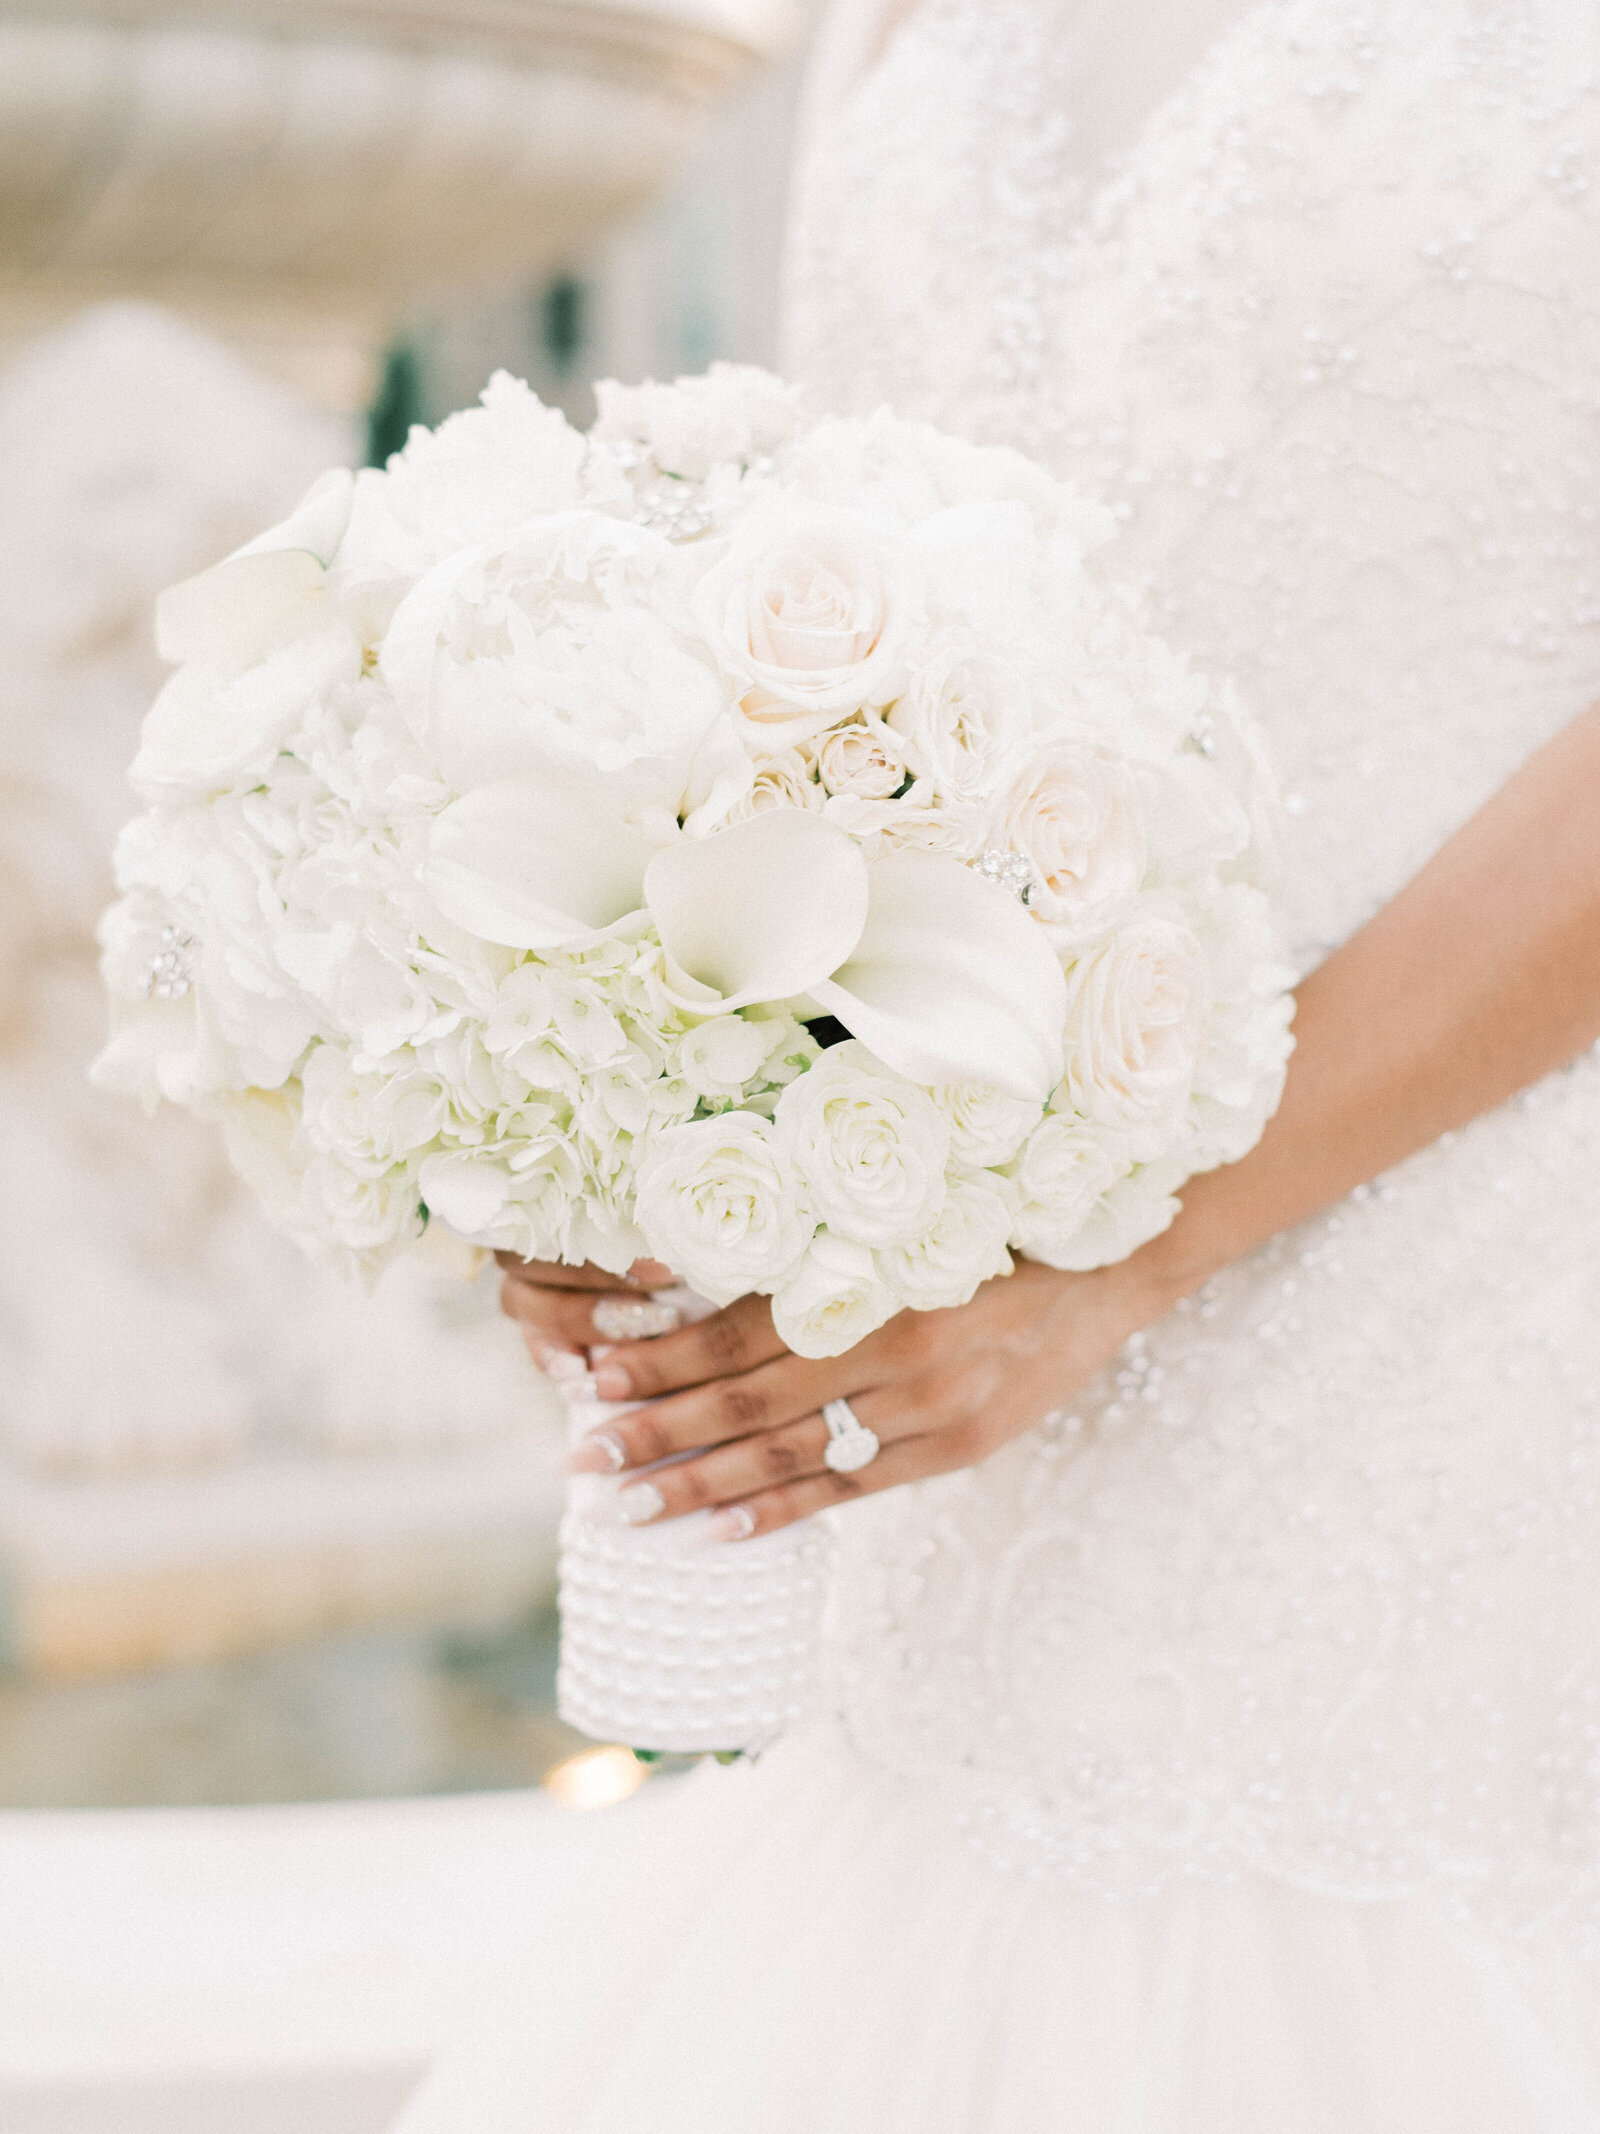 Wedding bouquet with white roses and hydrangeas